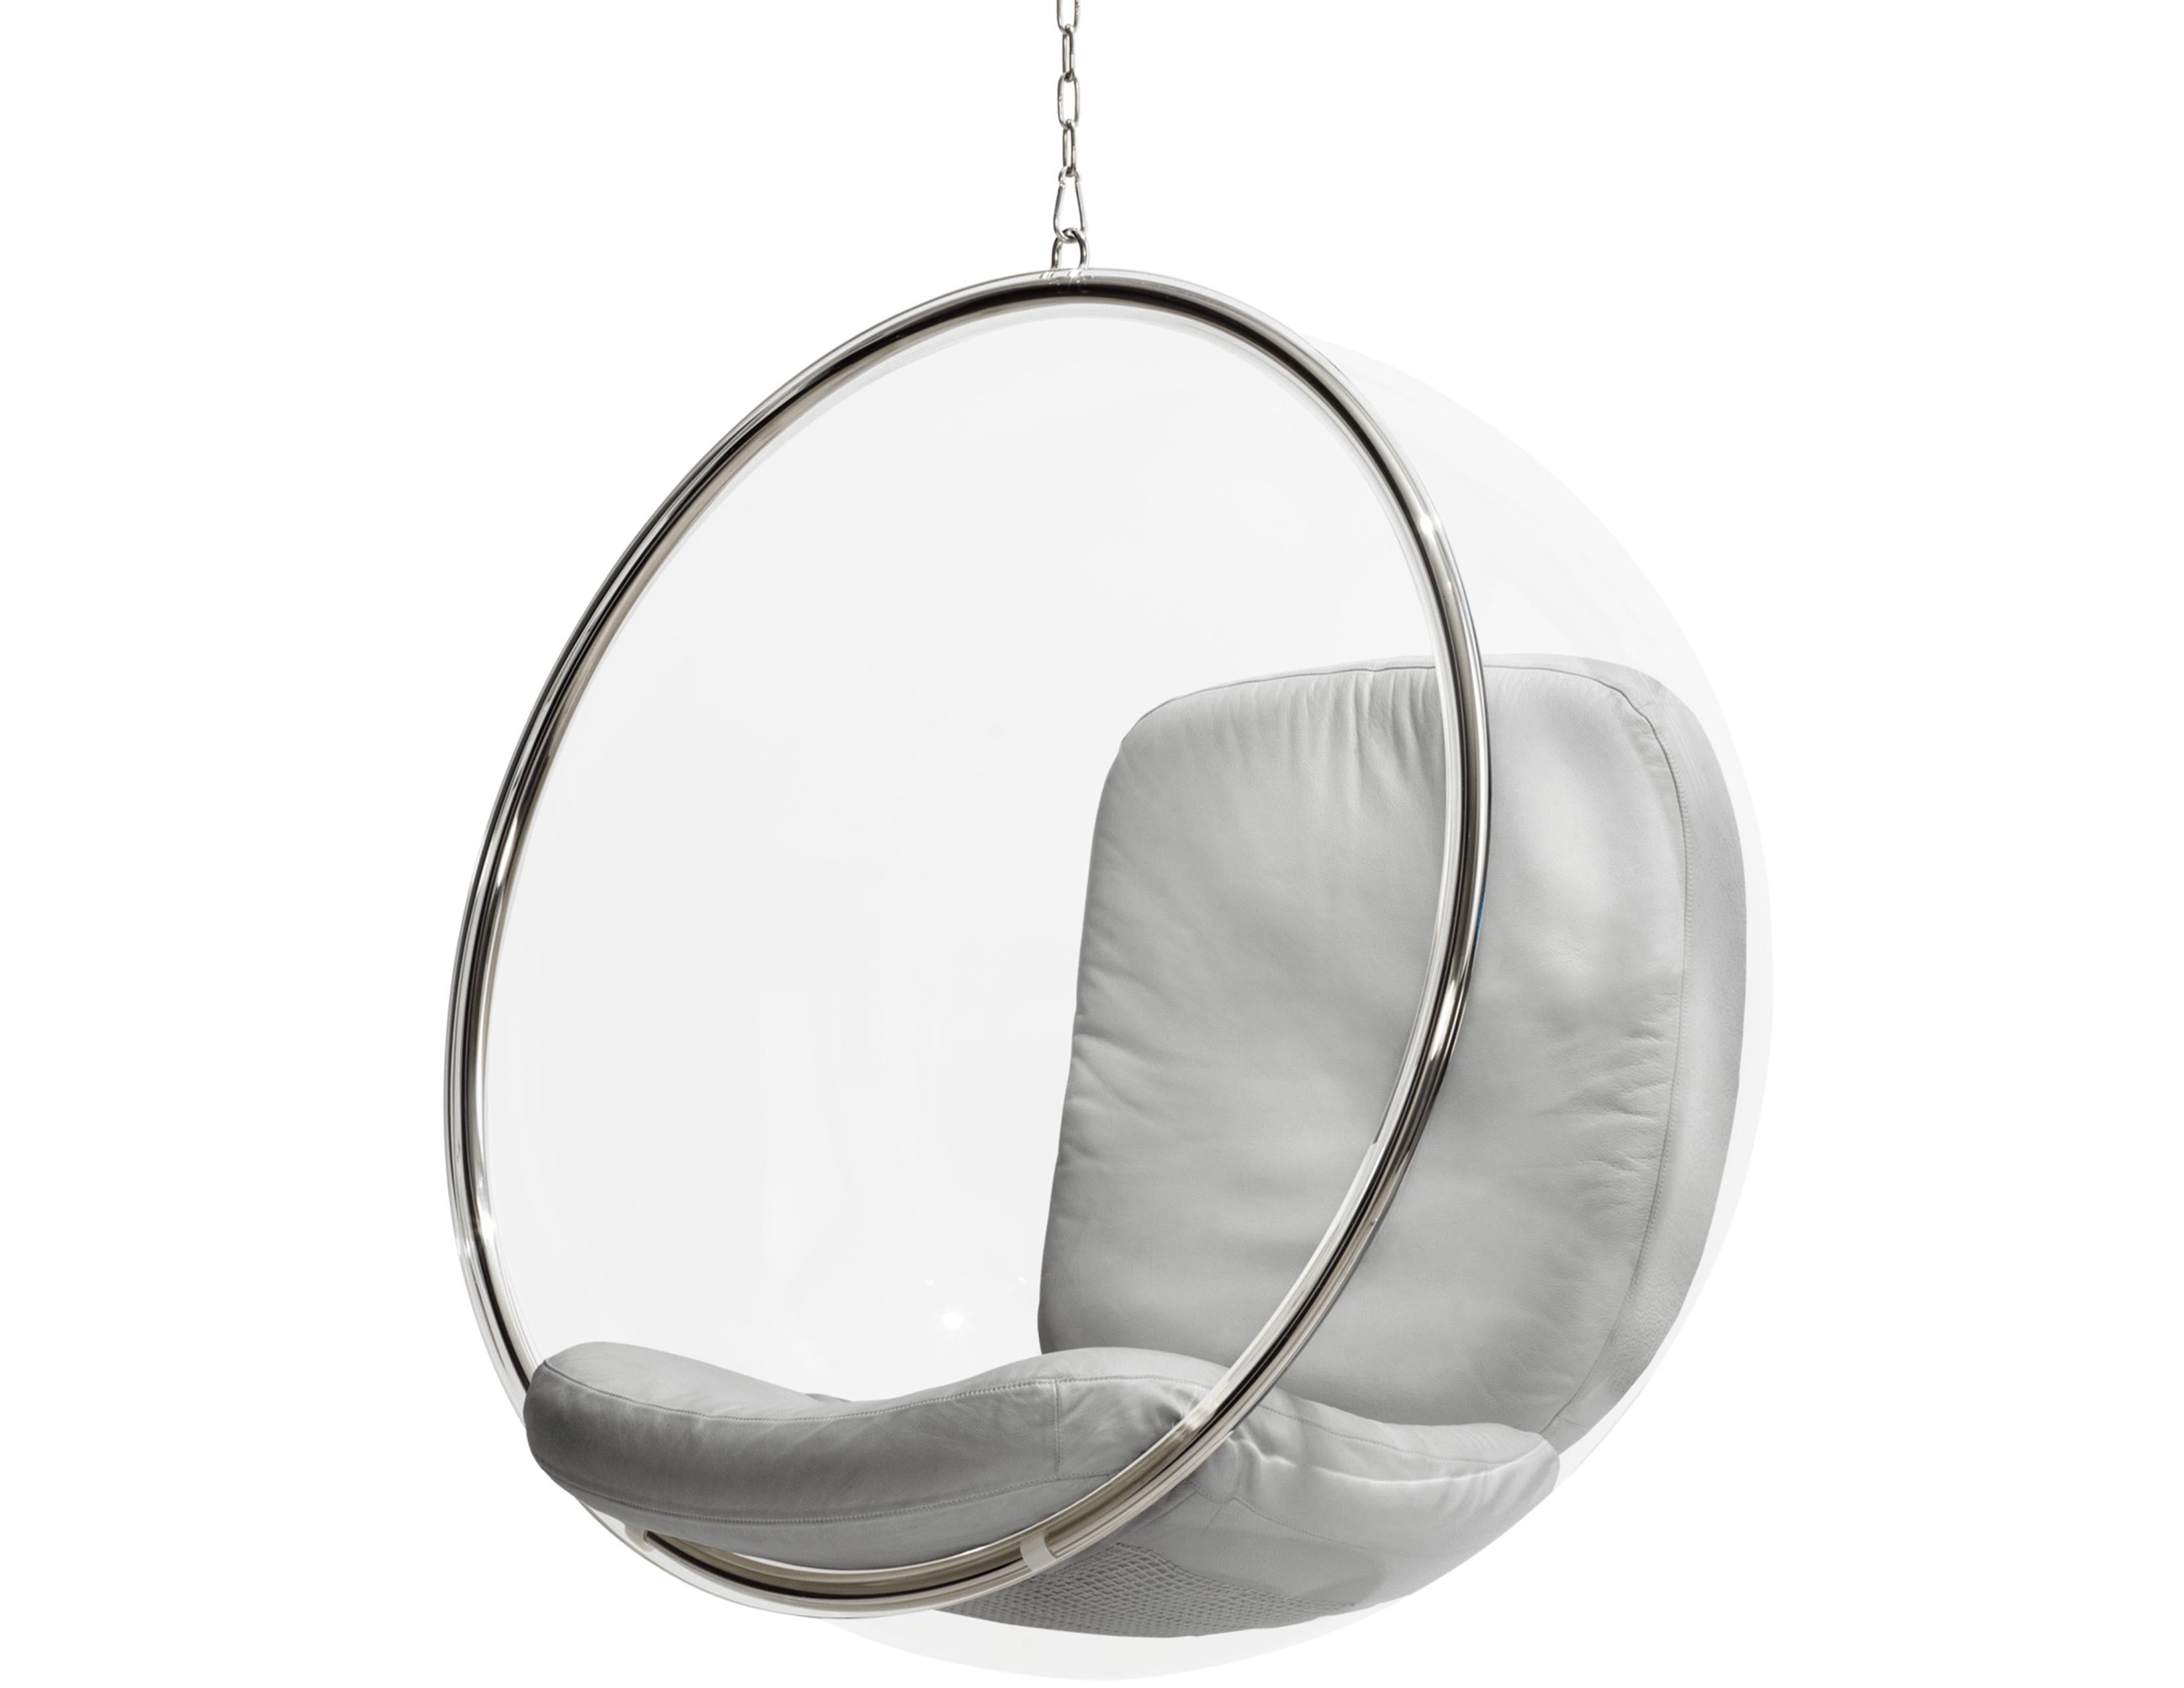 Contemporary Iconic Eero Aarnio Natural Leather Bubble Chair For Sale